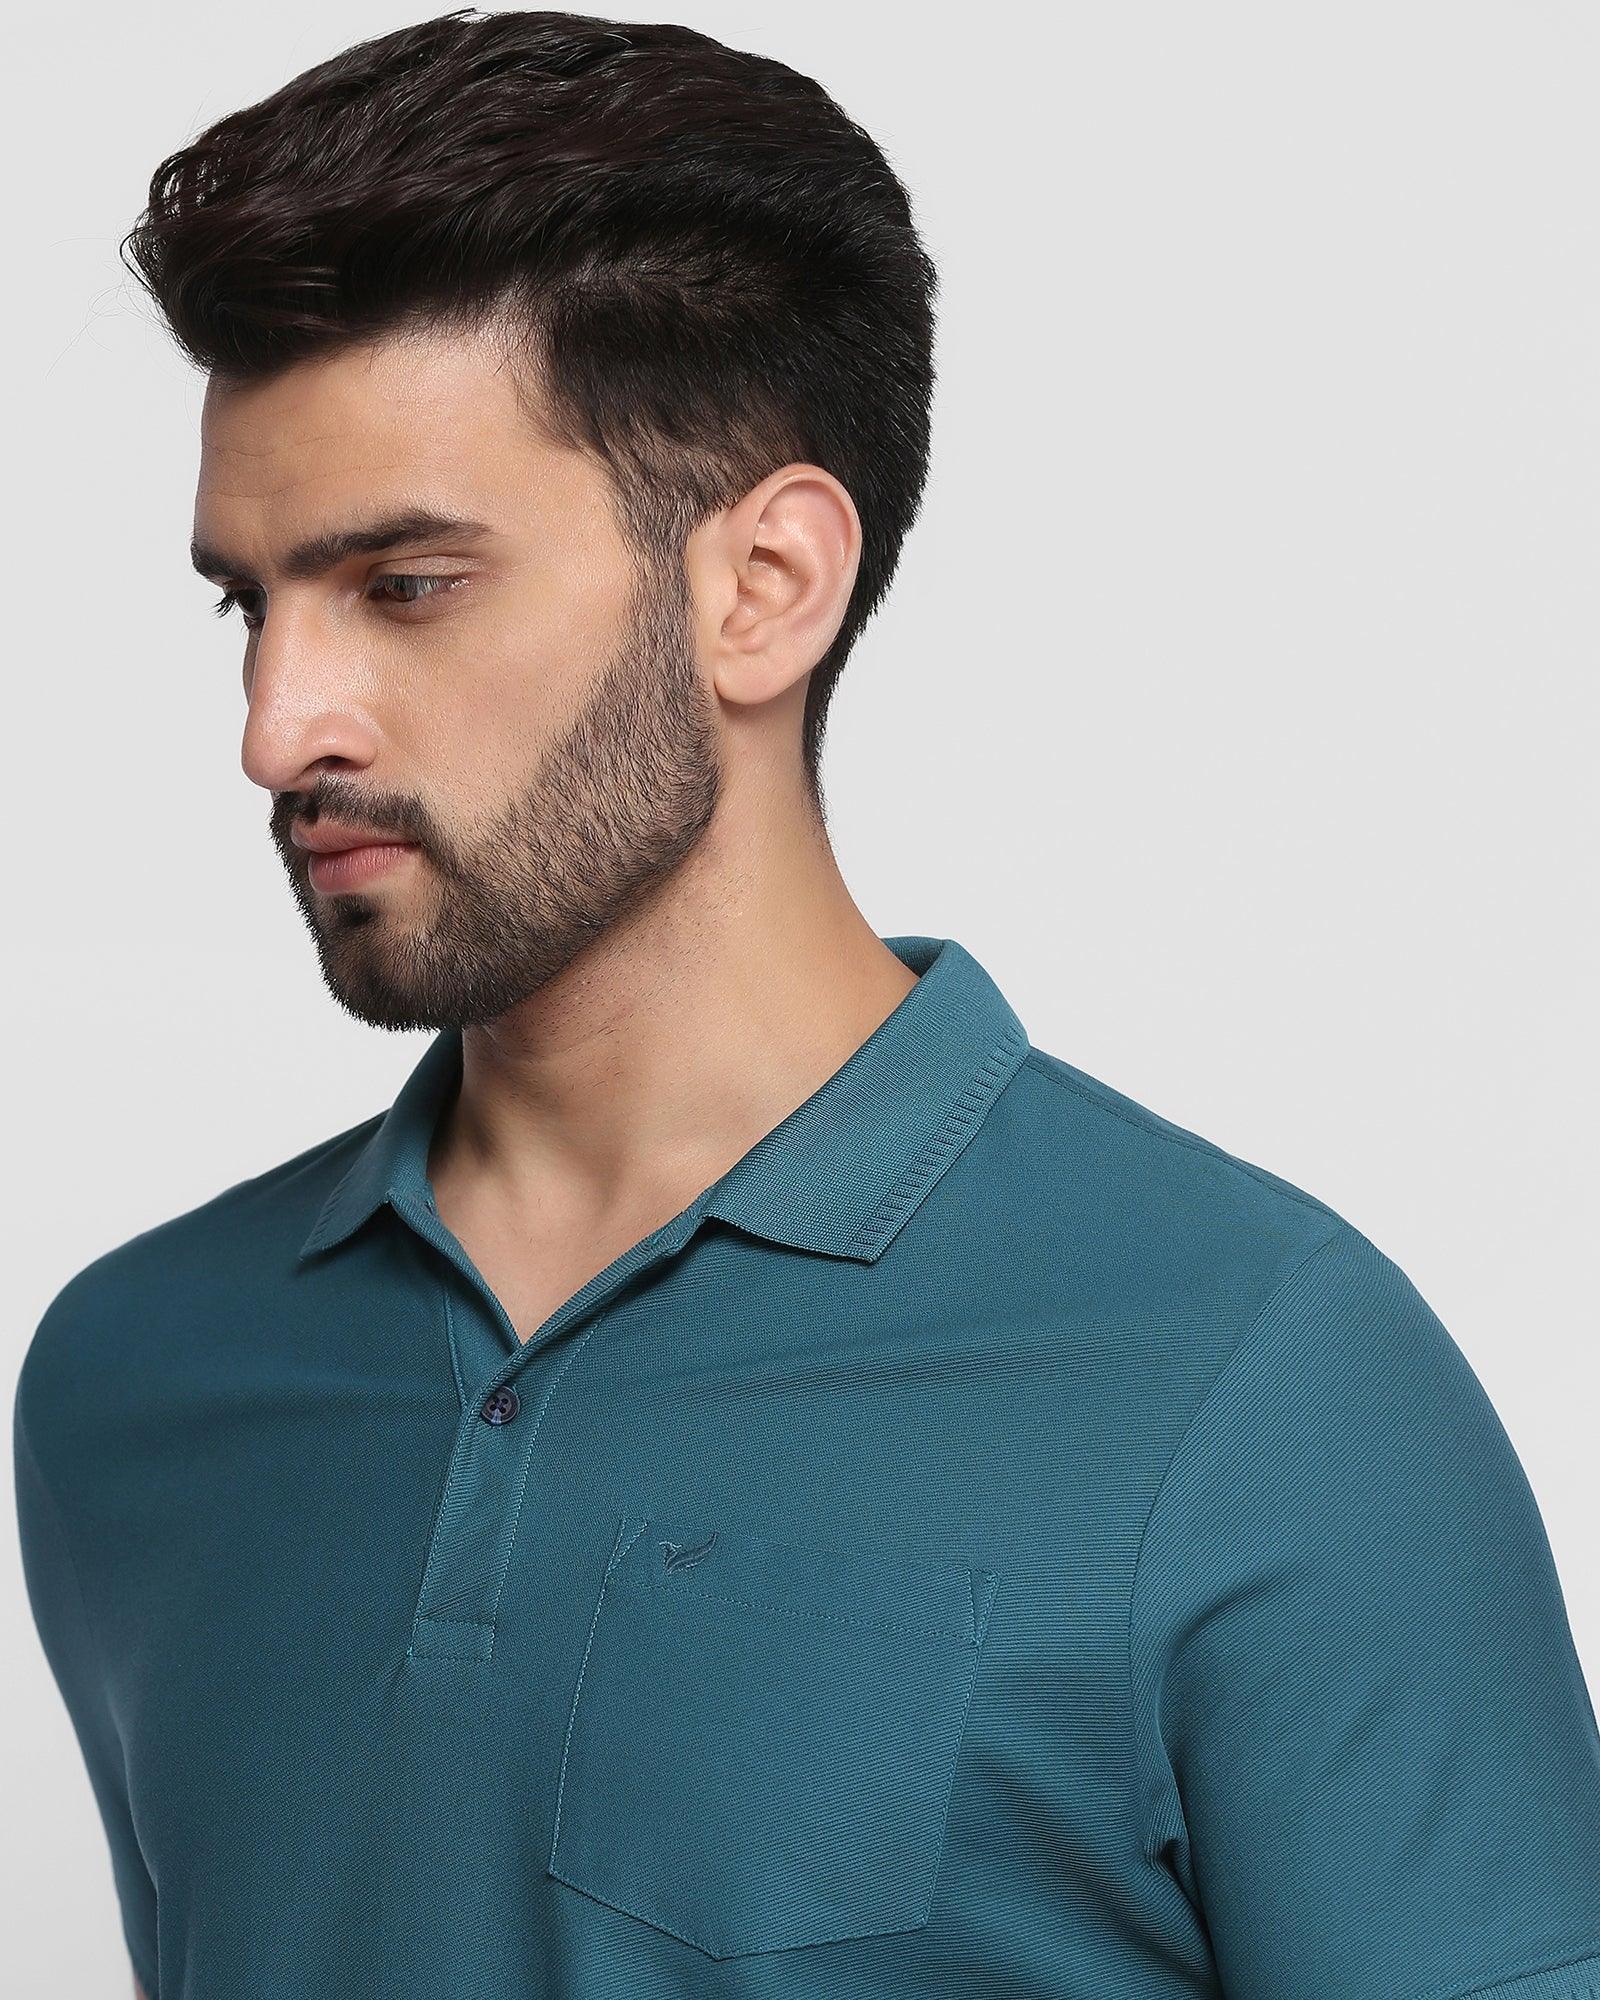 Polo Teal Textured T Shirt - Pipit